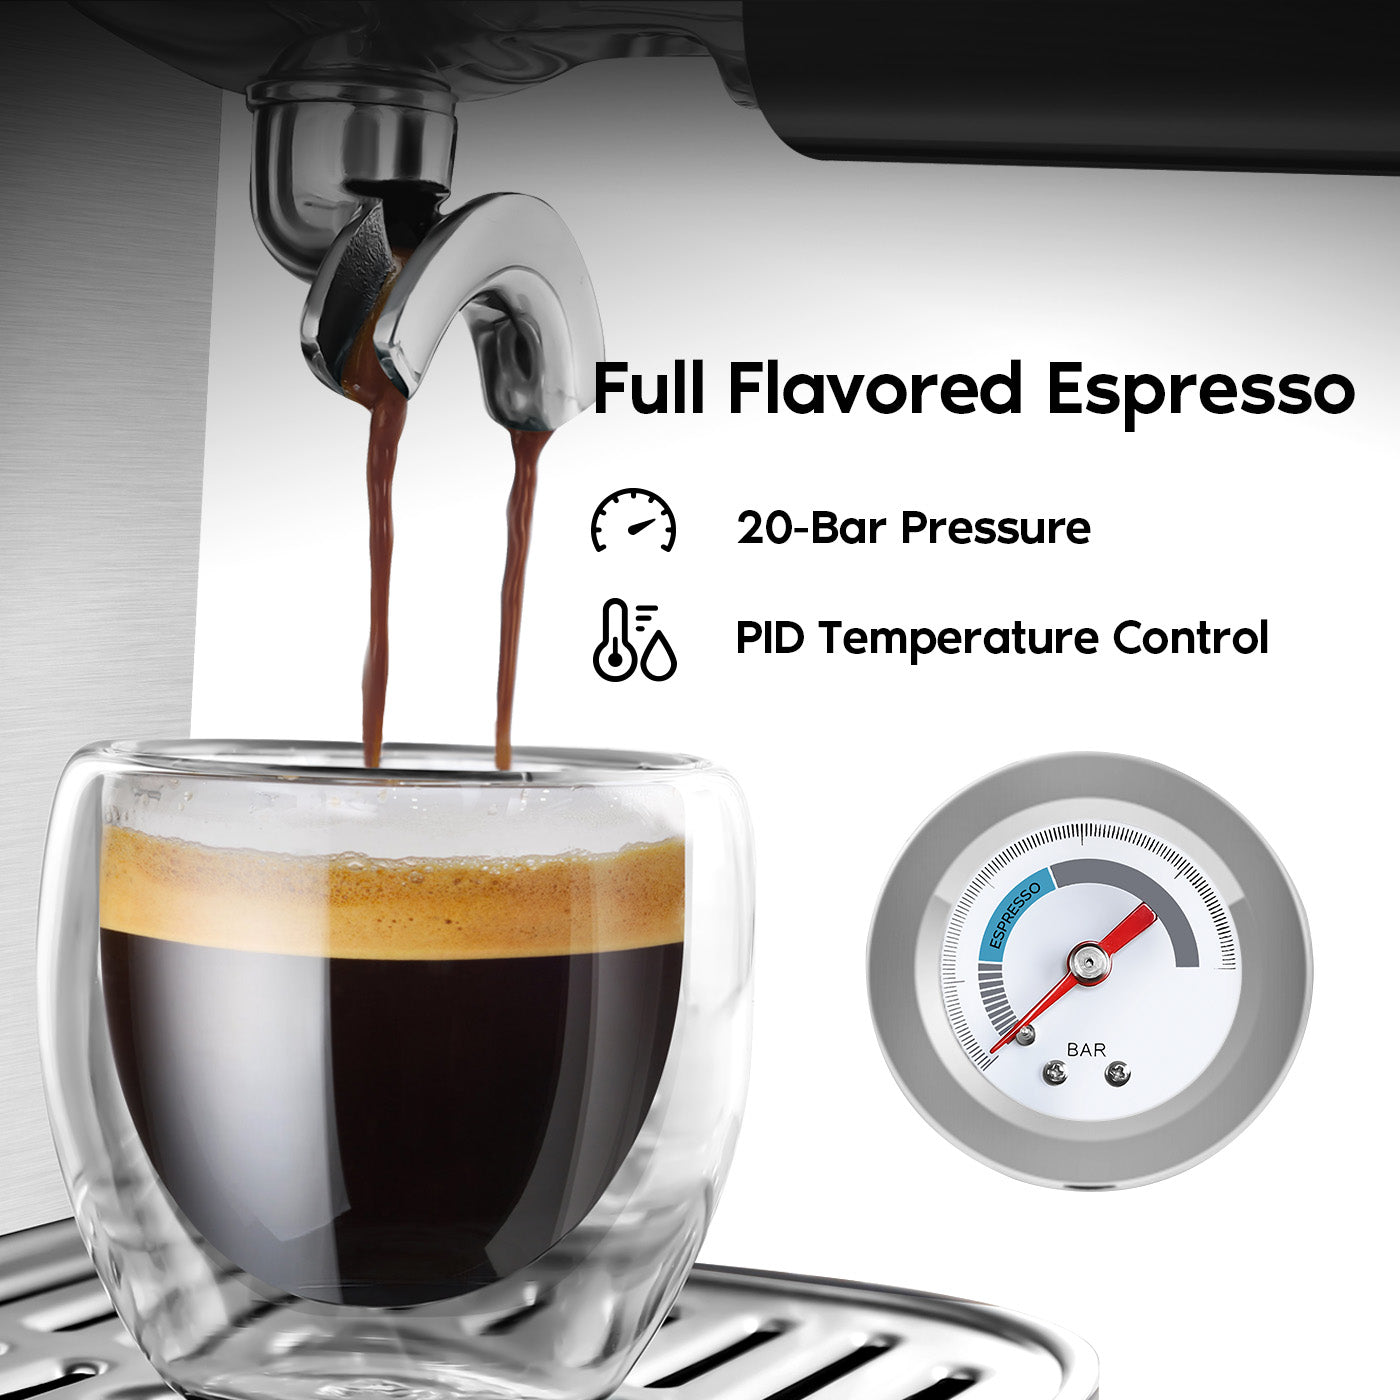 CASABREWS 3700PRO™ 20-Bar Semi-Automatic Espresso Machine with Auto-Frothing System